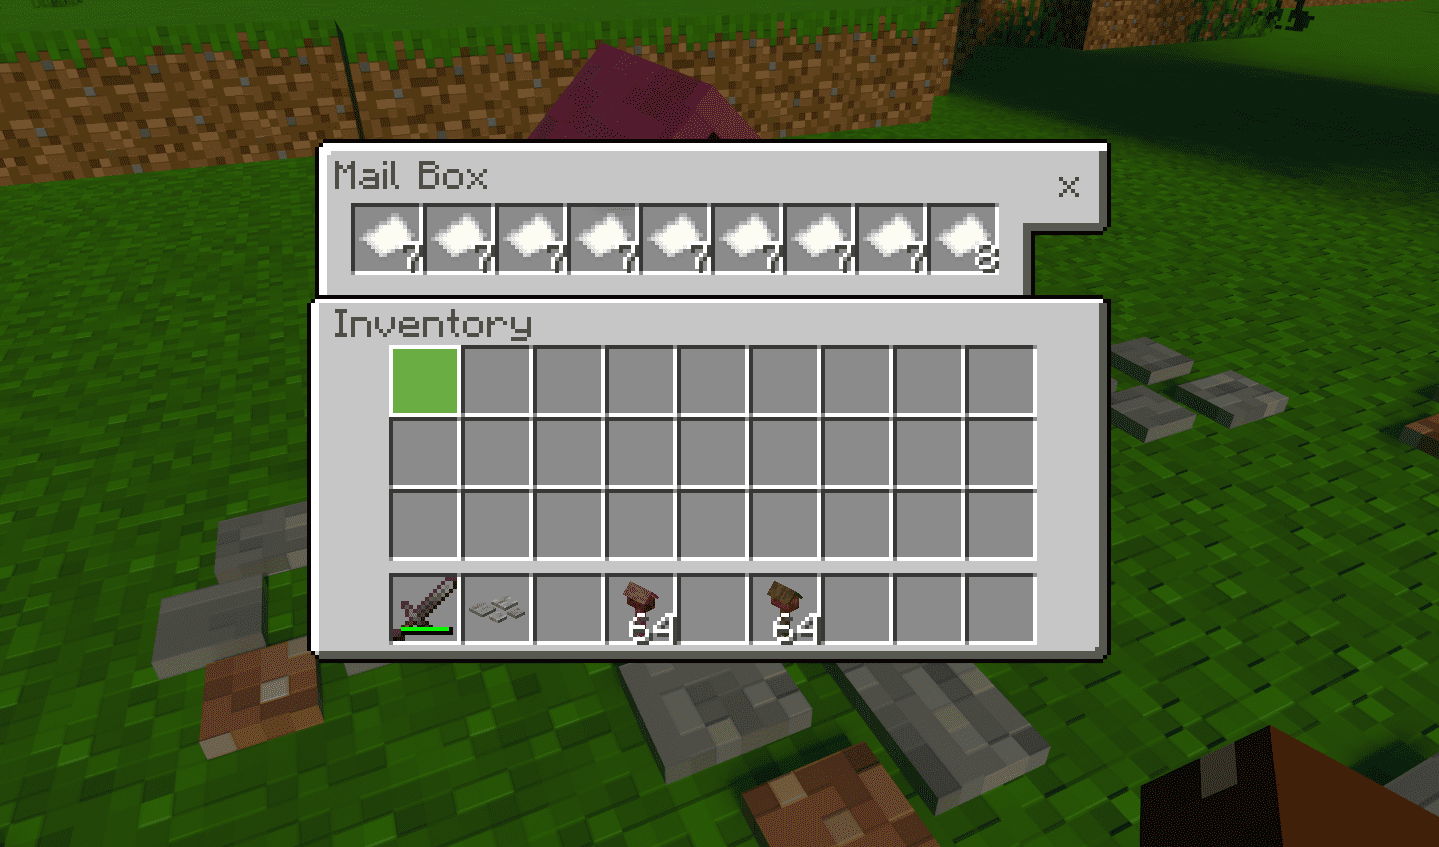 Mail box inventory